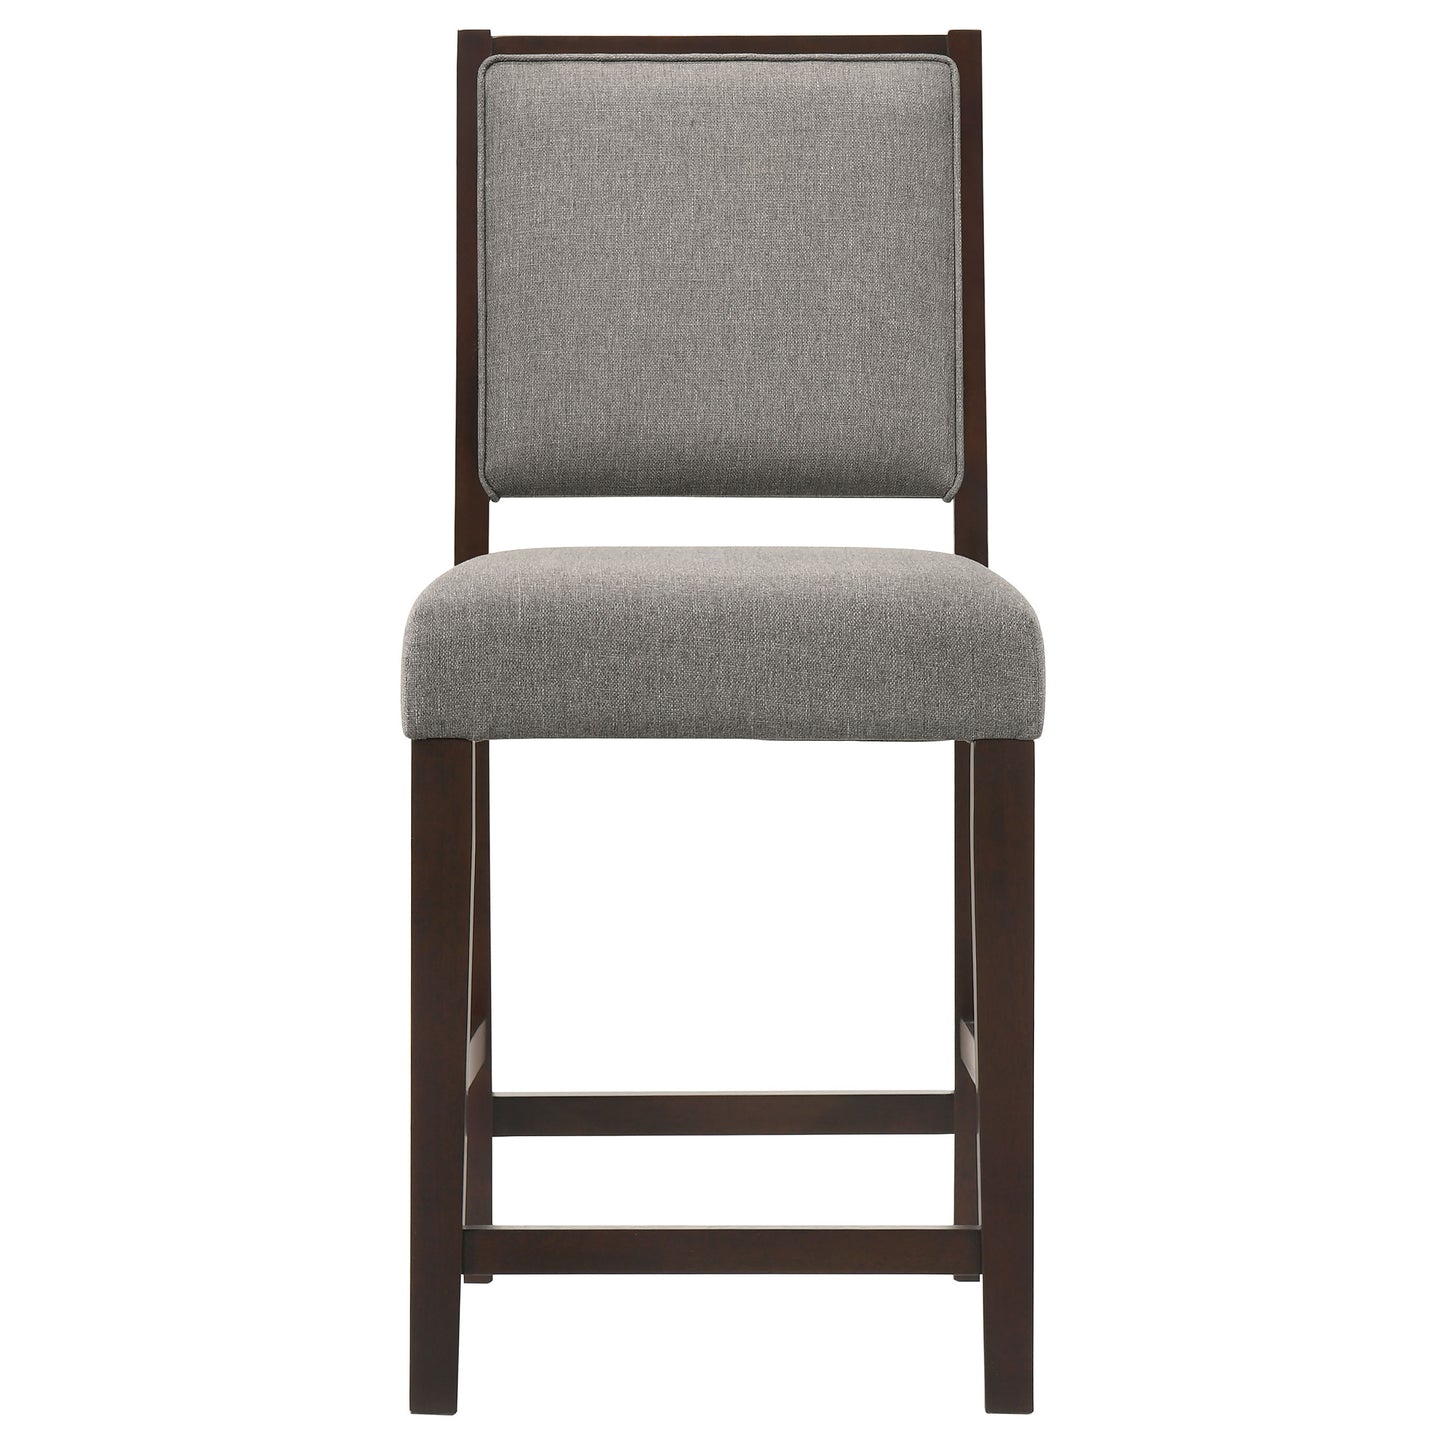 Bedford Upholstered Open Back Counter Height Stools with Footrest (Set of 2) Grey and Espresso